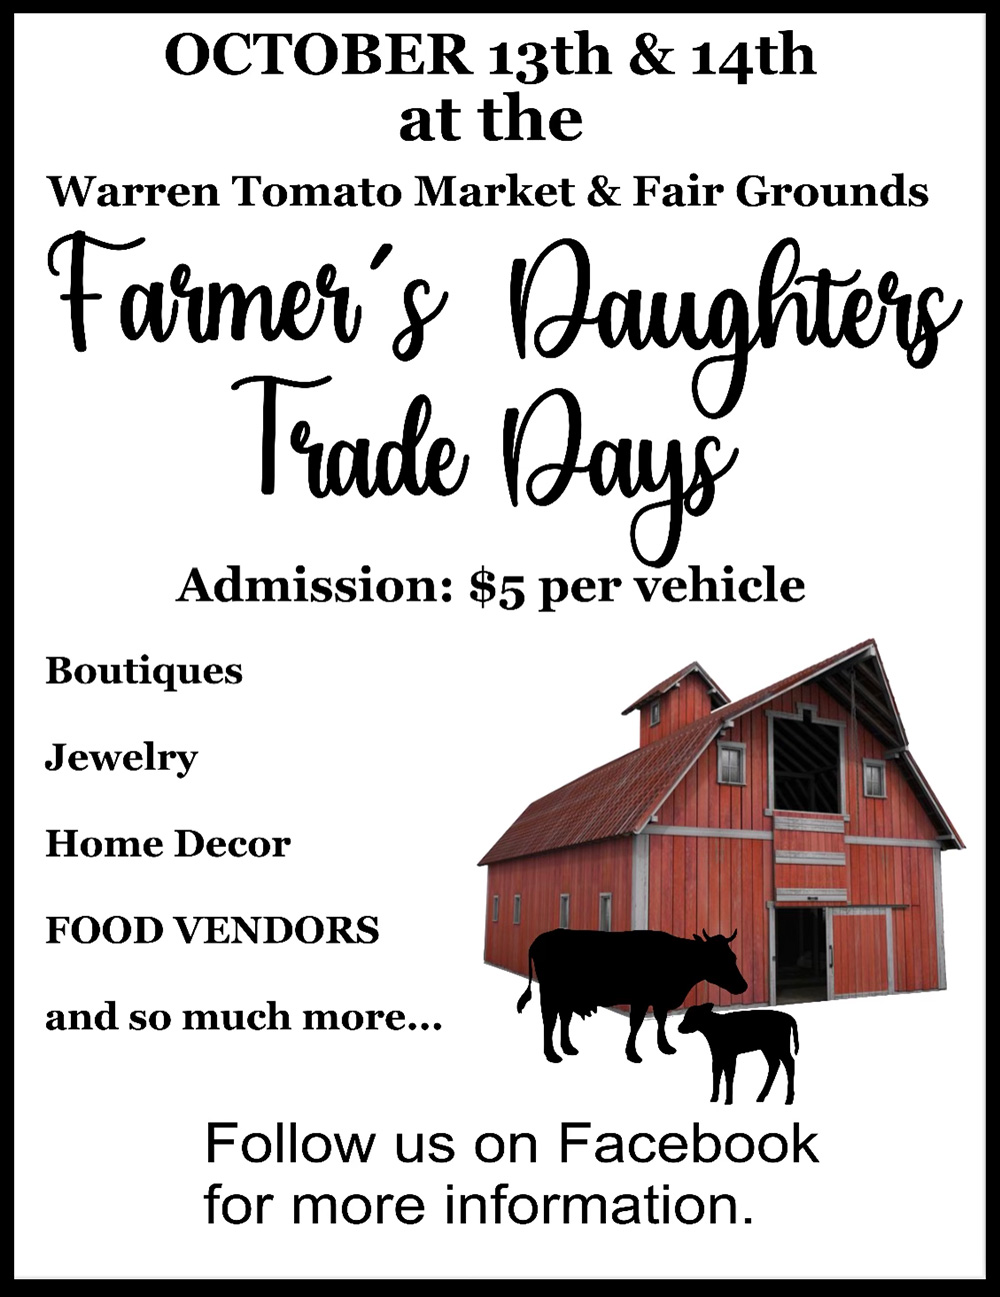 Farmer’s Daughters Trade Days coming October 13th and 14th